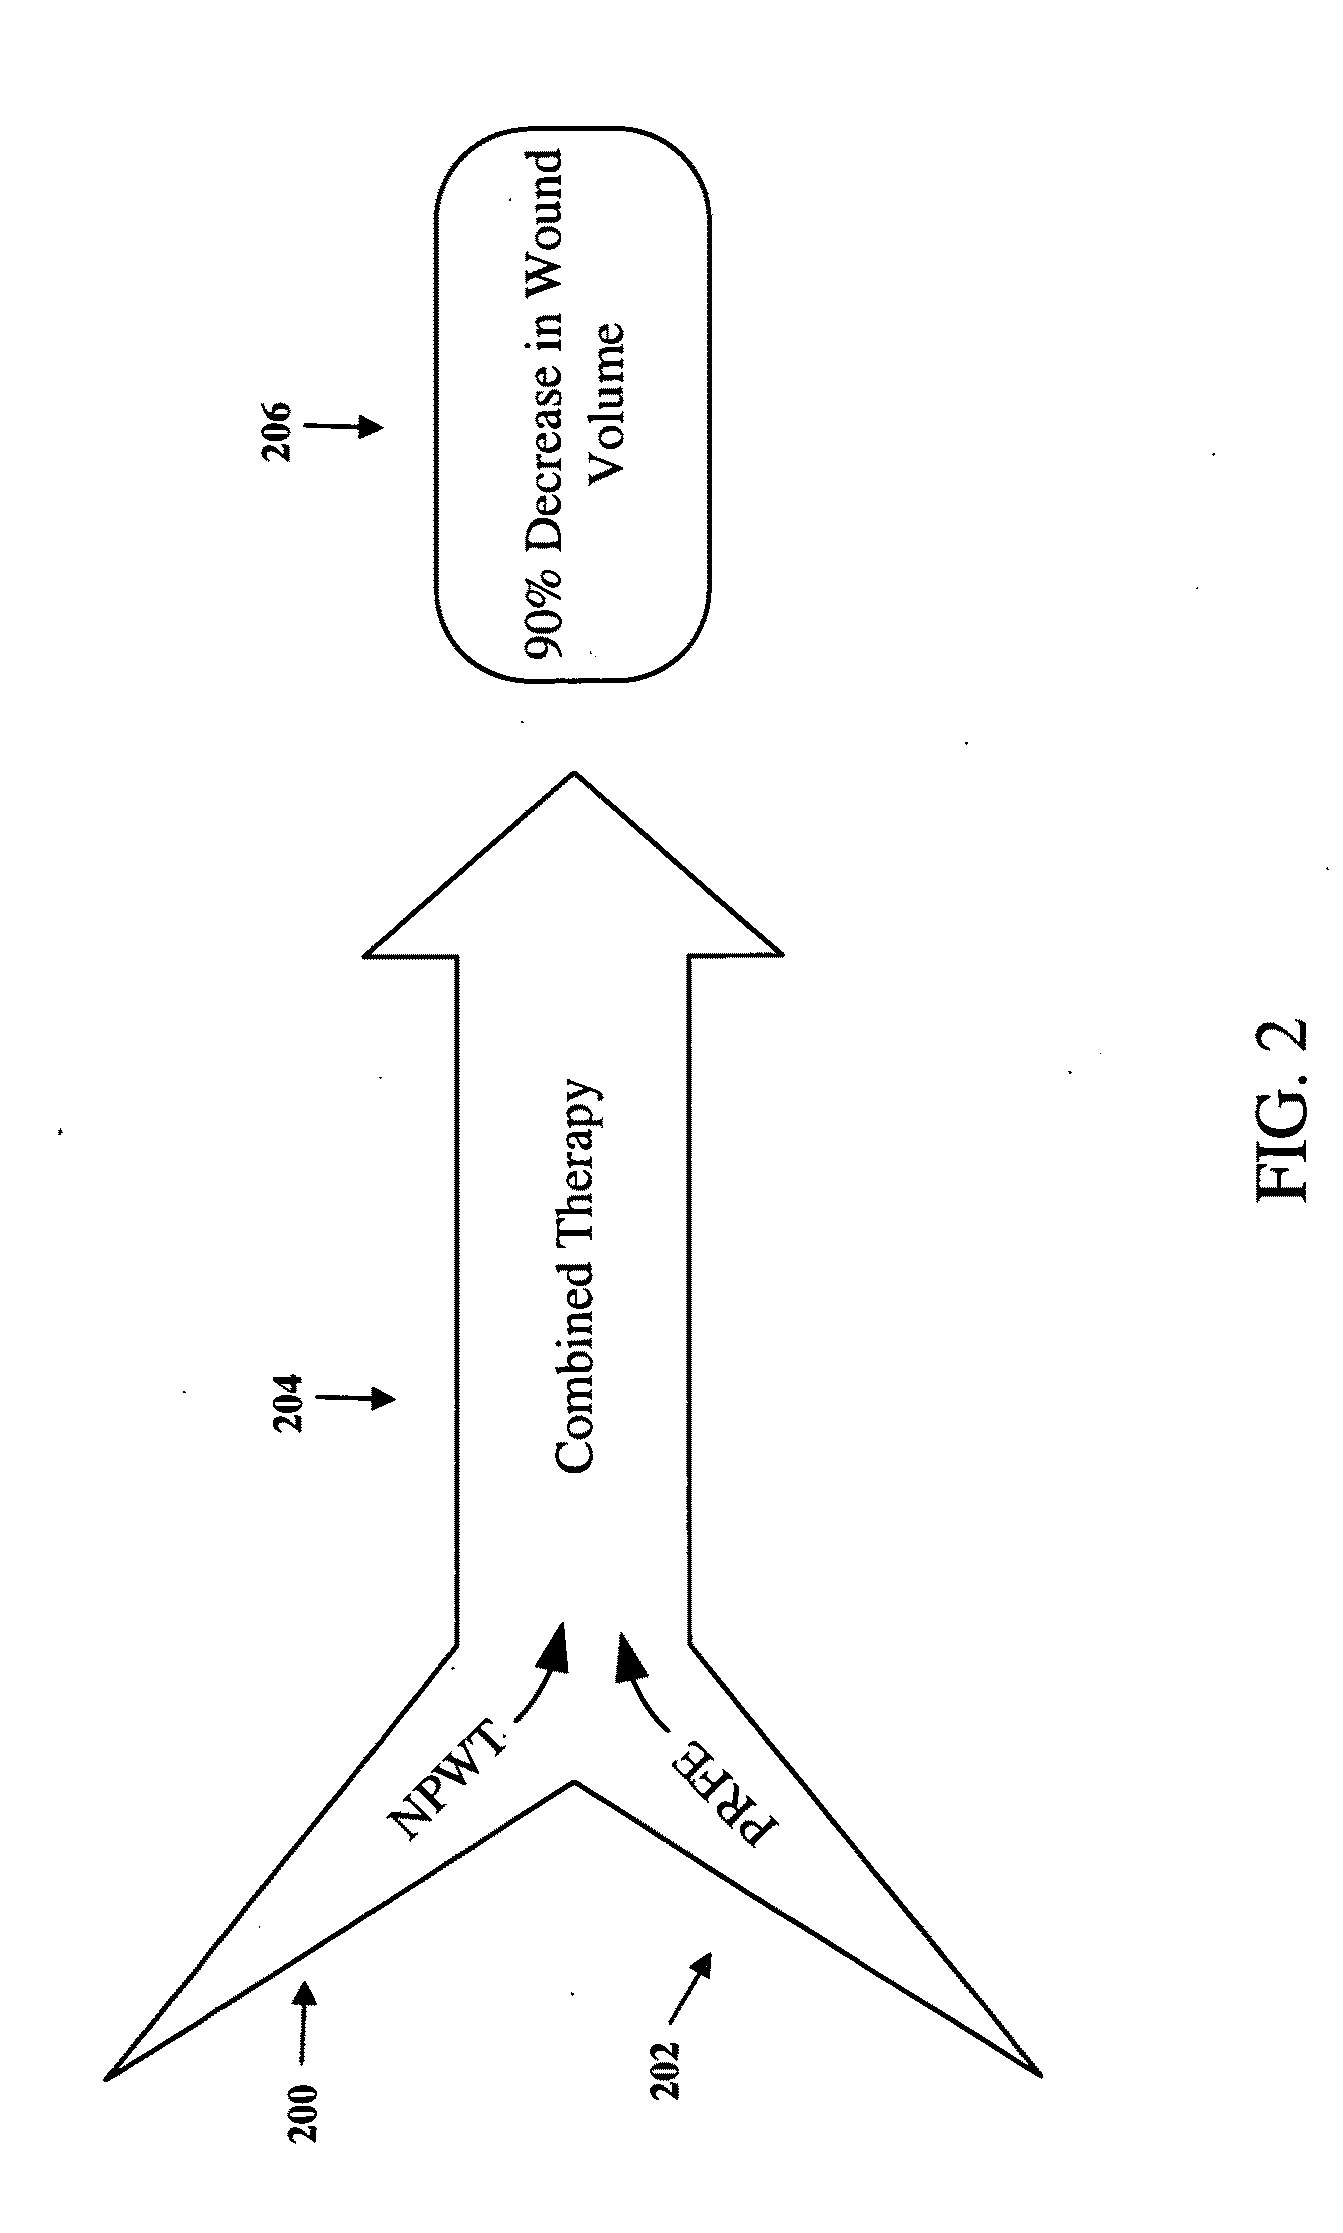 Pulsed electromagnetic field and negative pressure therapy wound treatment method and system